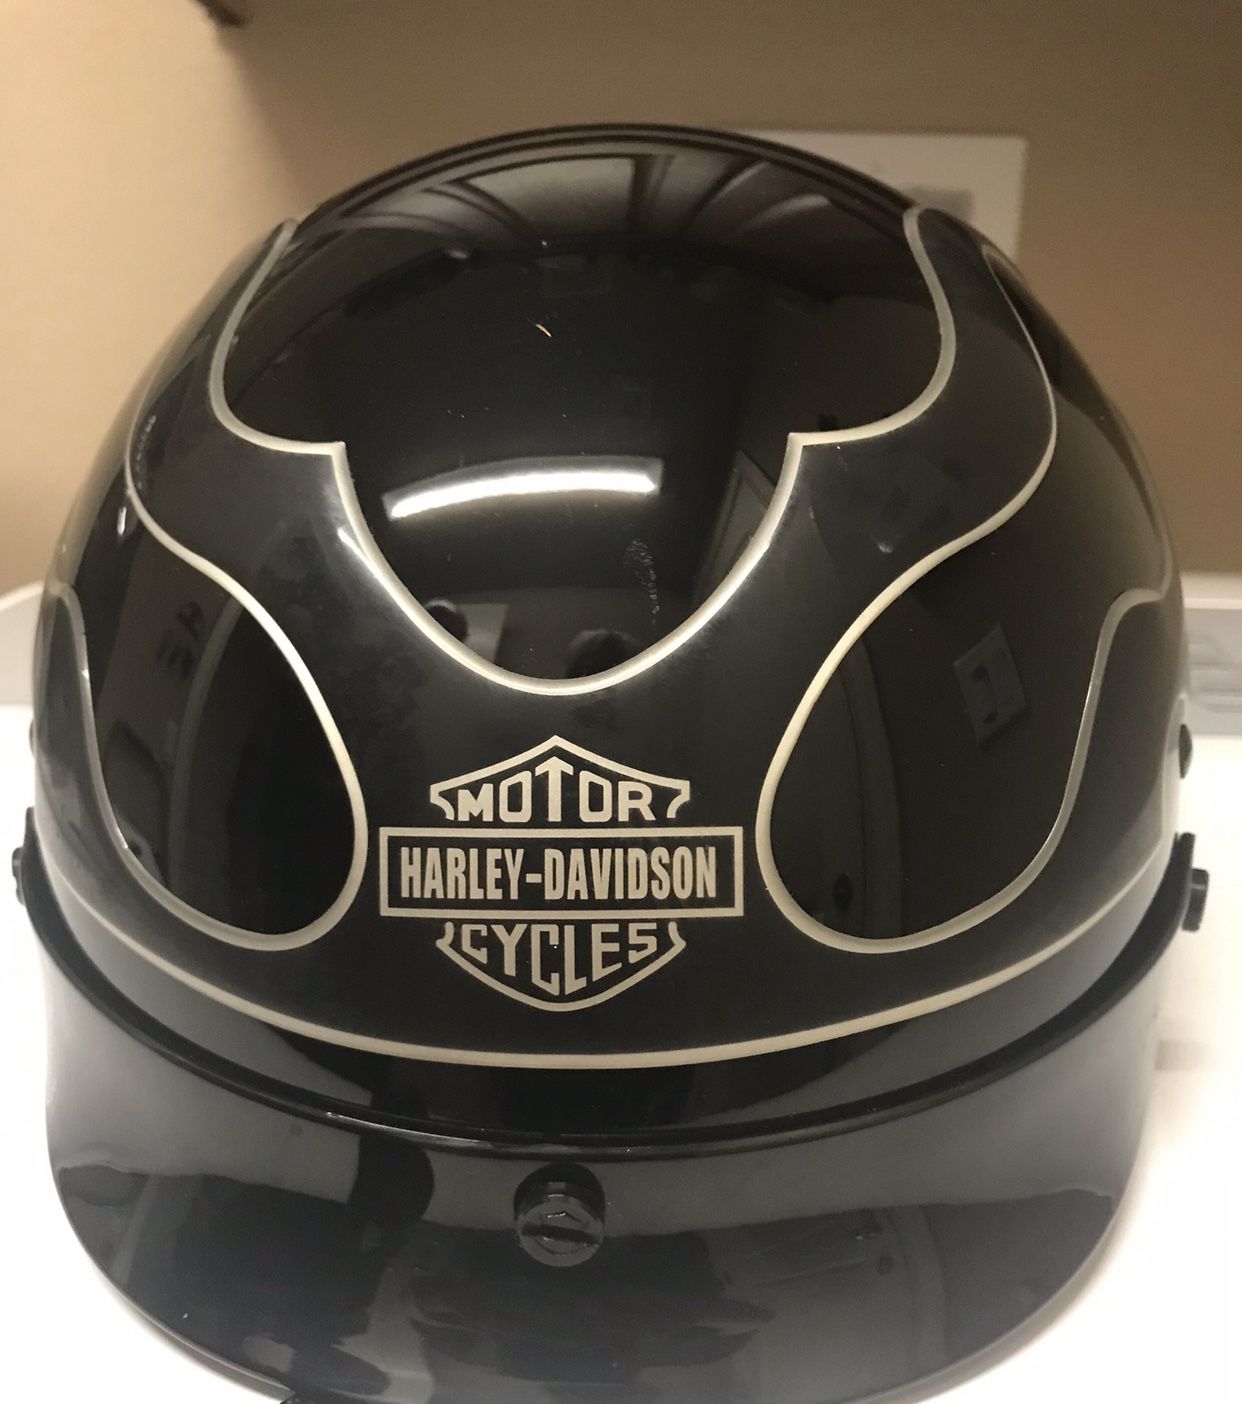 Ladies Small DOT approved helmet